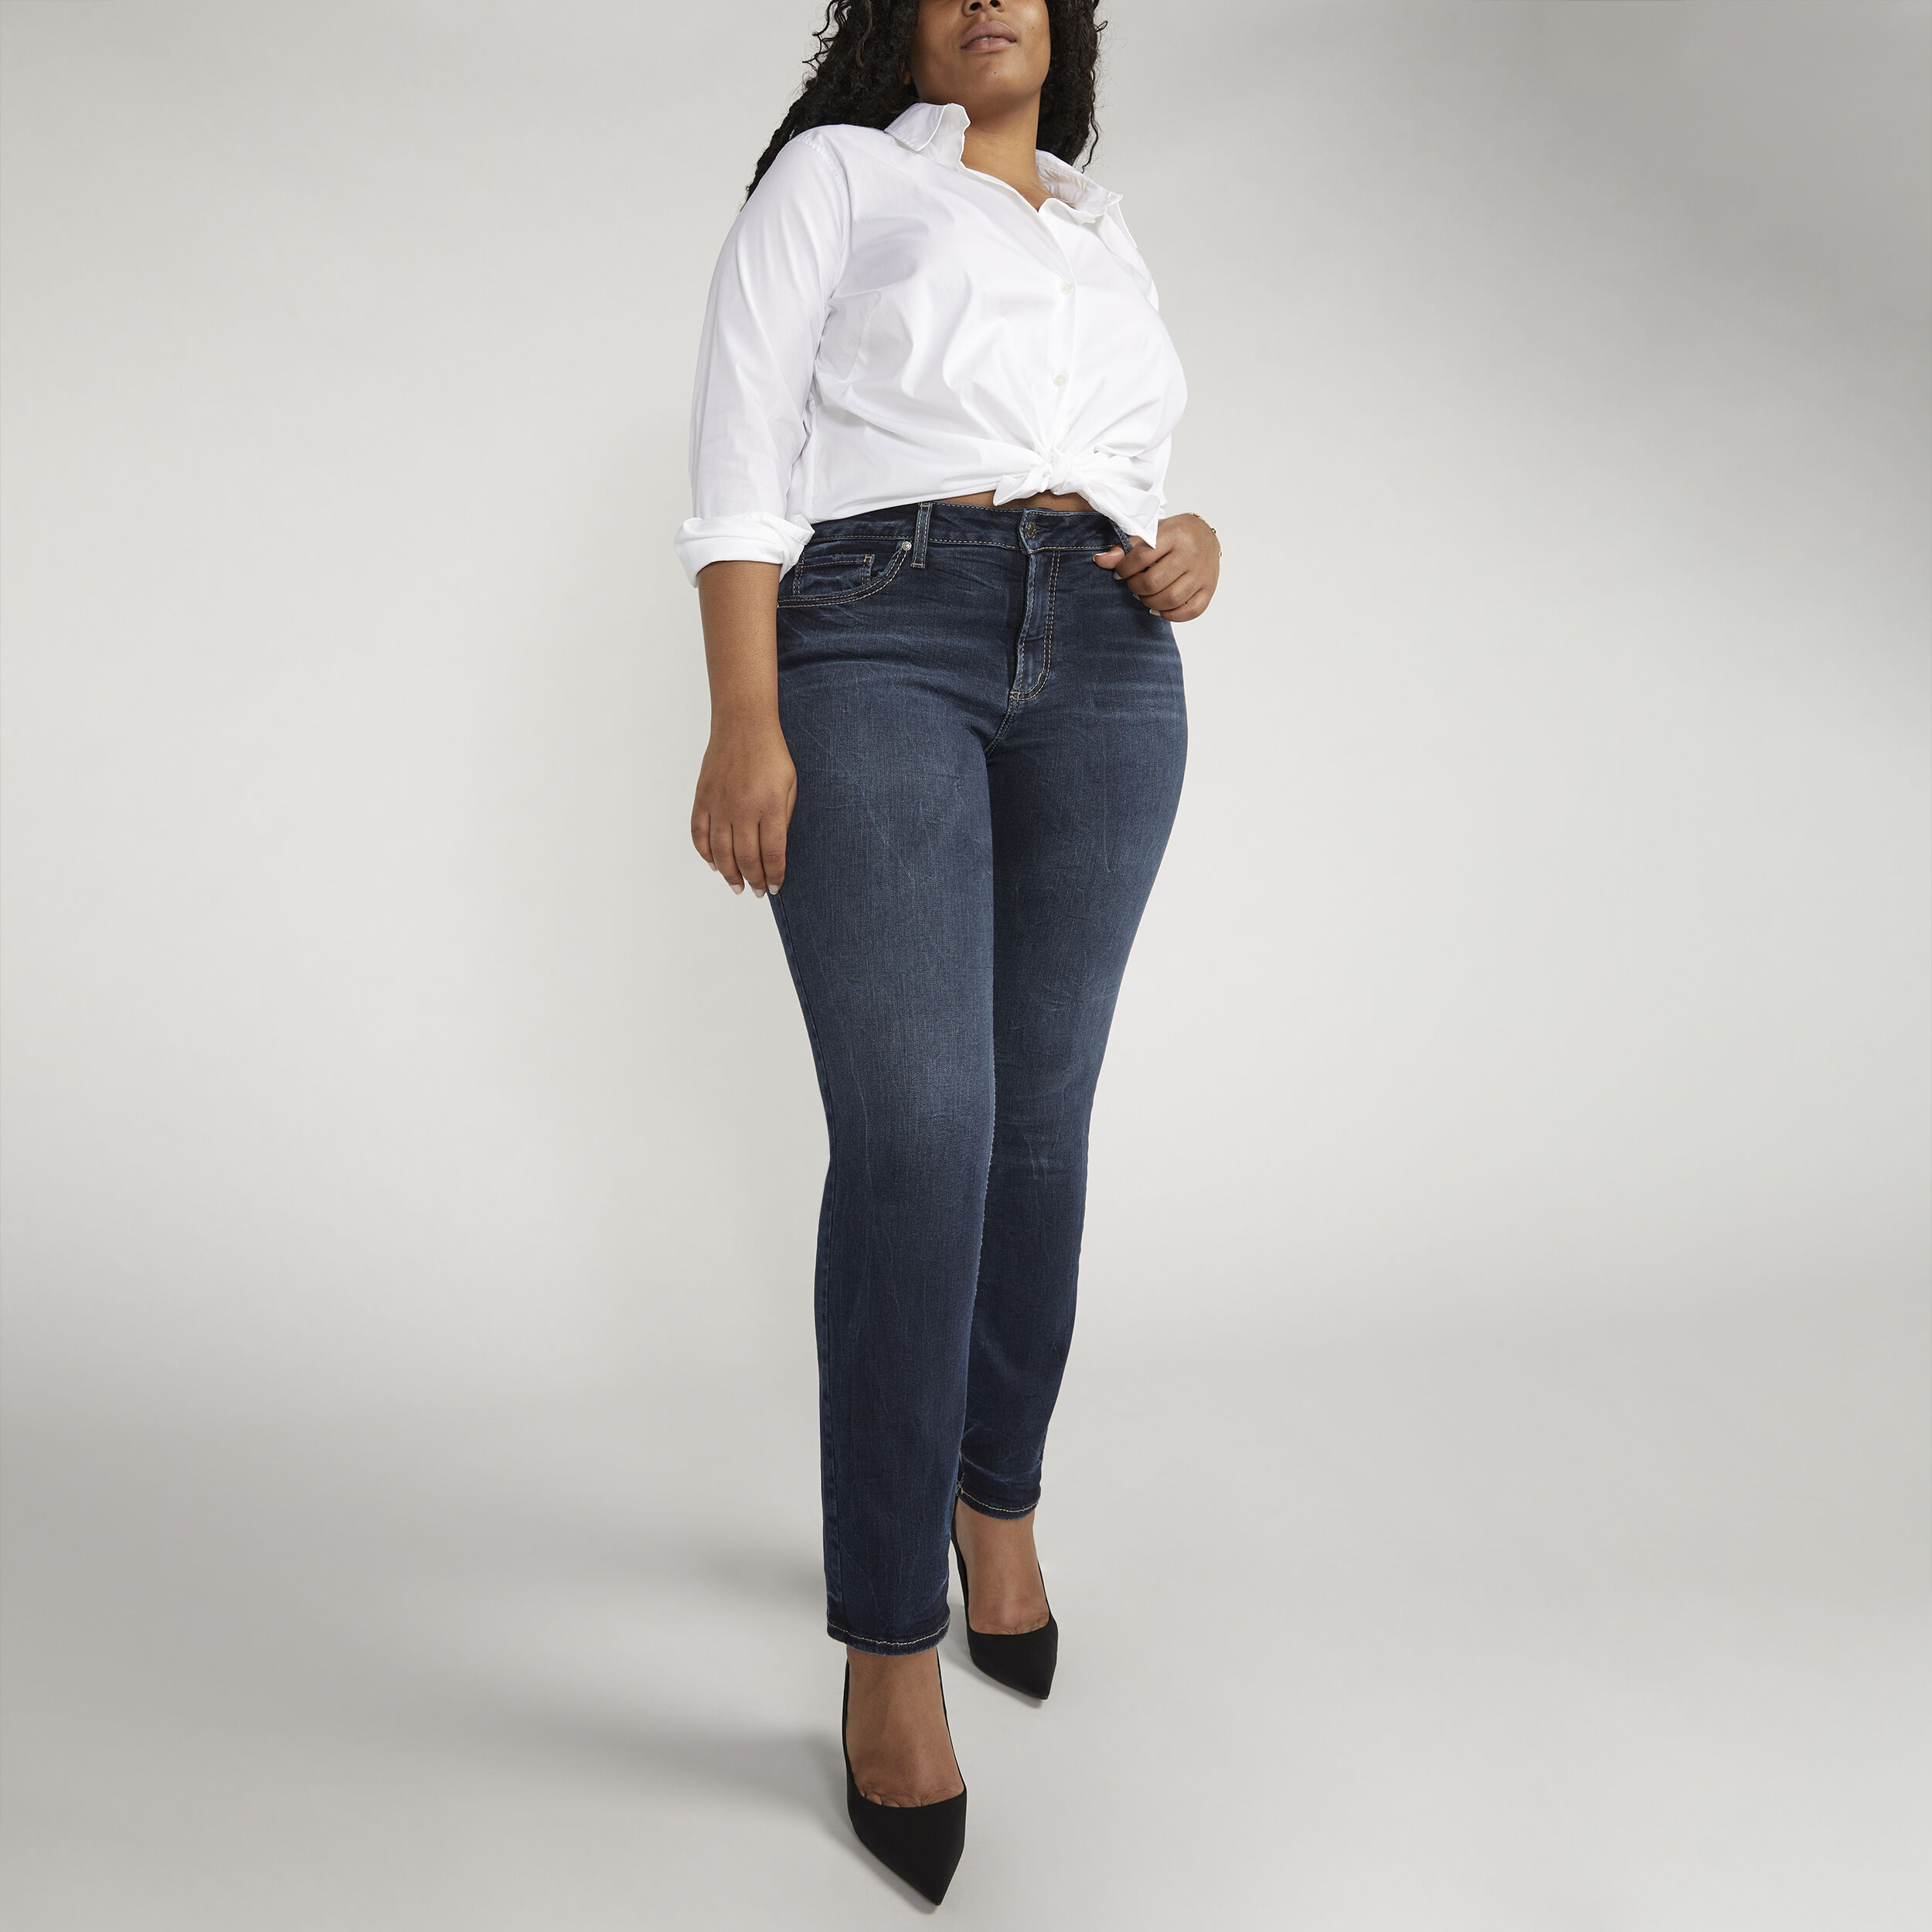 Buy Suki Mid Rise Straight Leg Jeans Plus Size for USD 88.00 